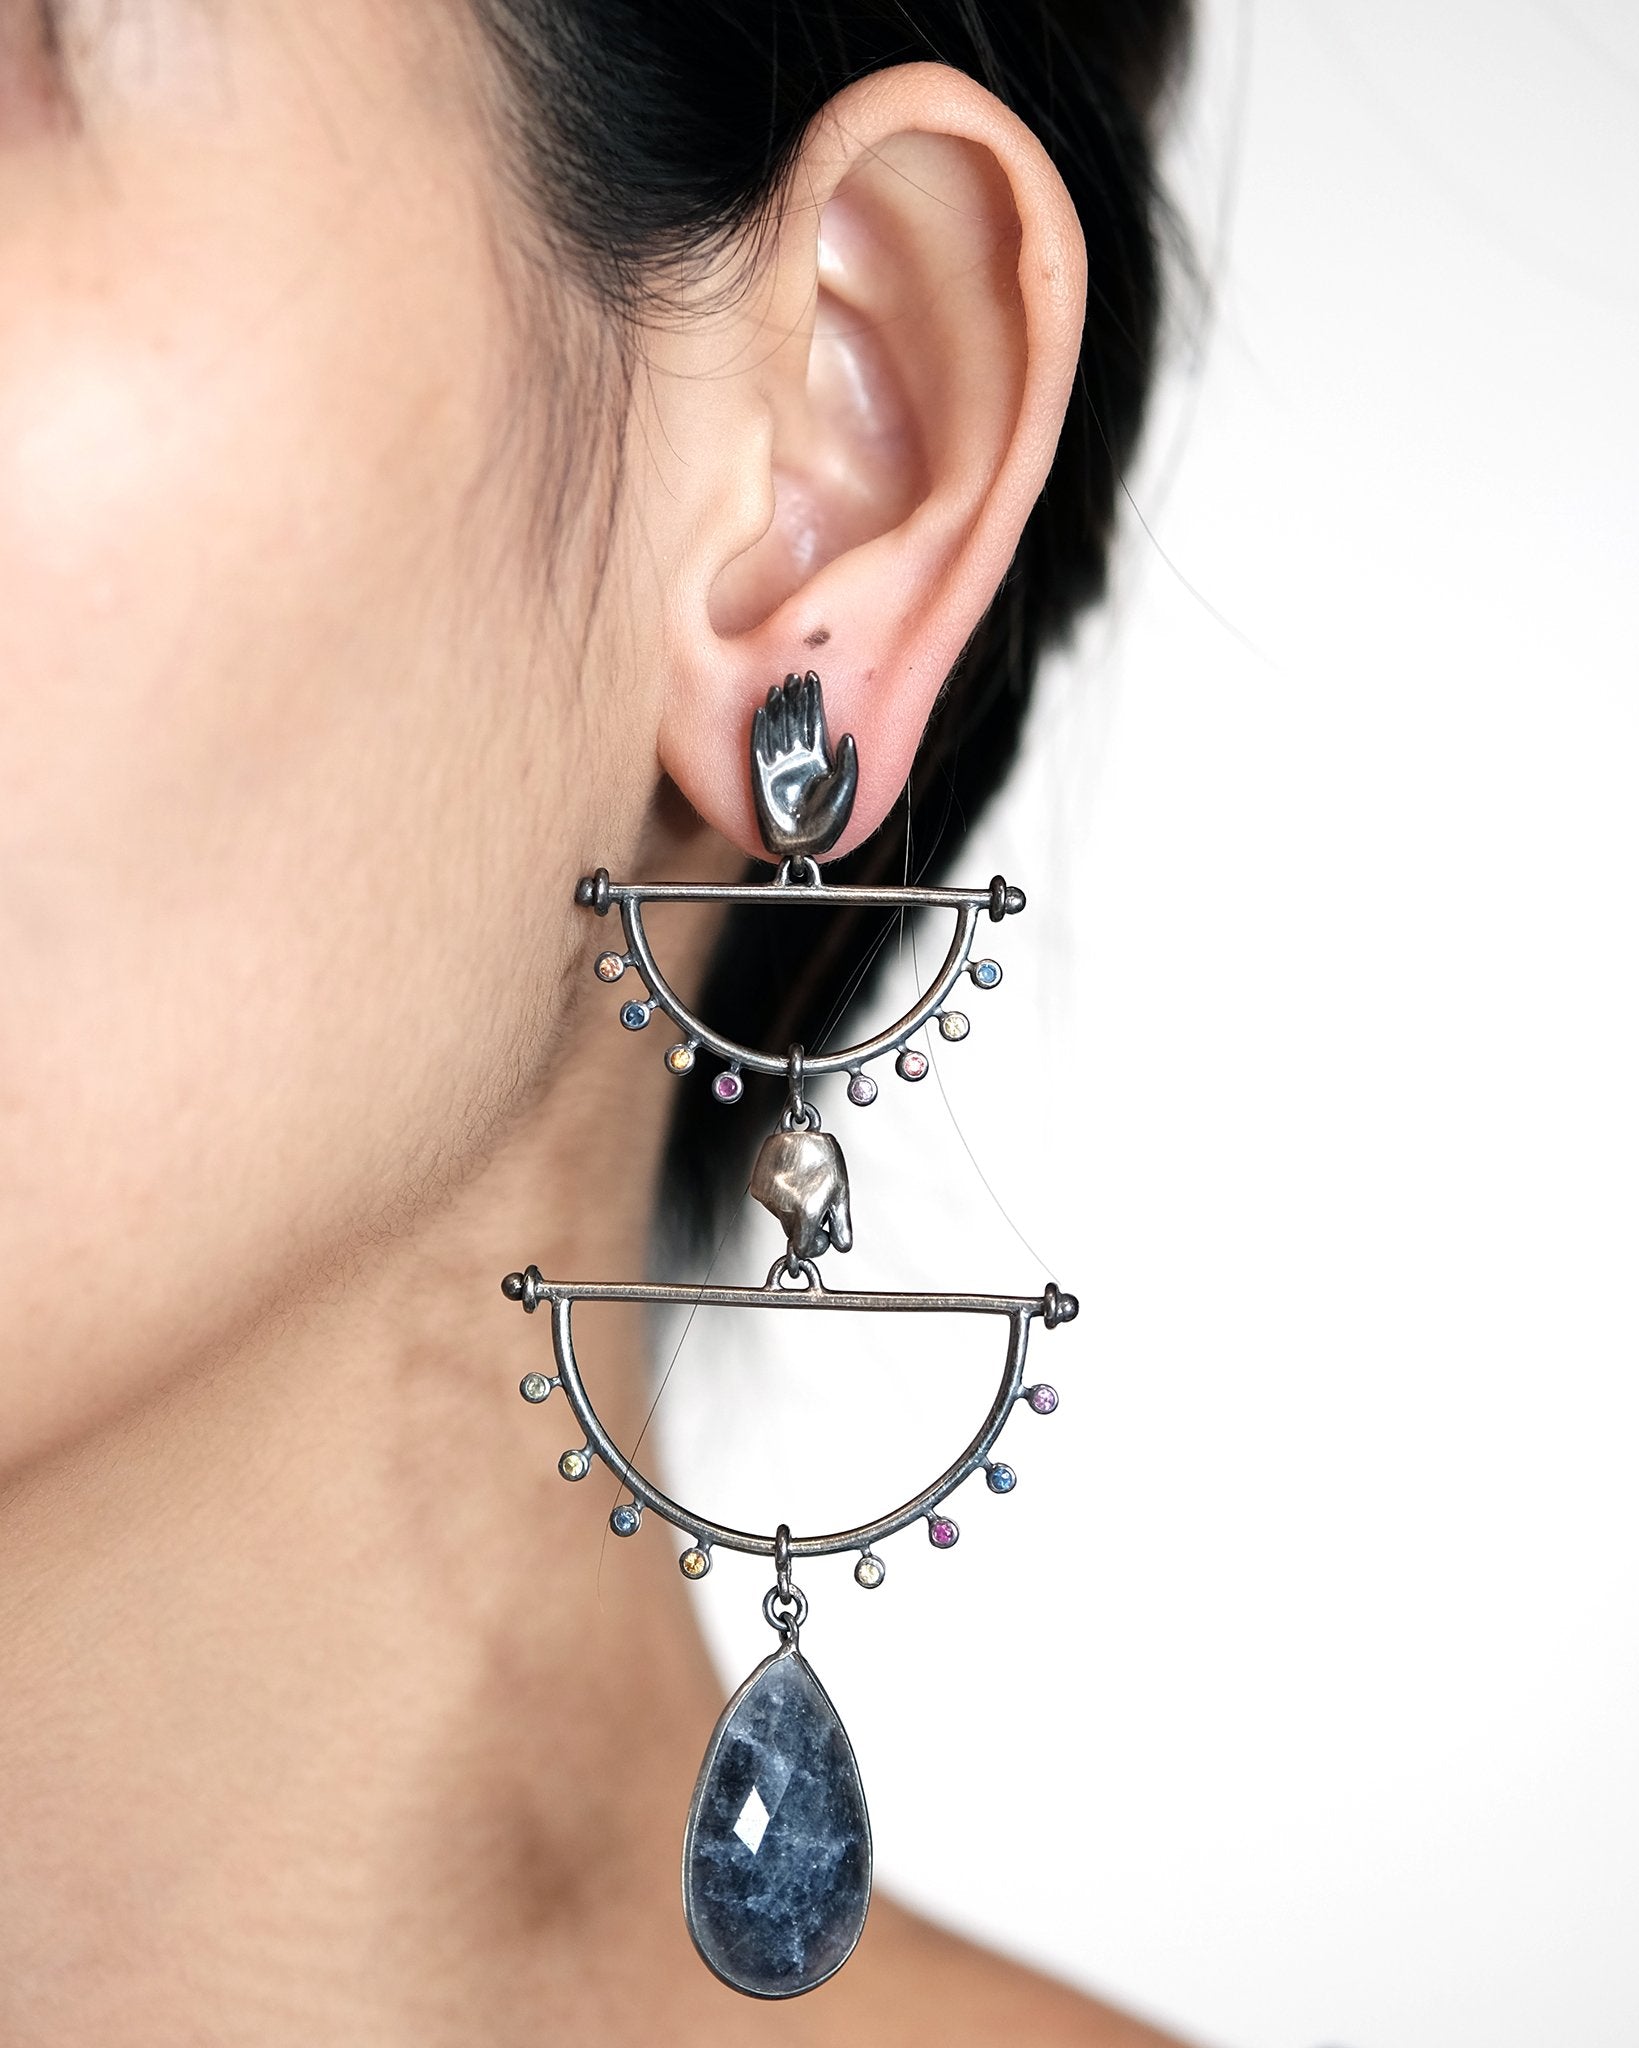 Double-tiered hand chandelier earrings with sapphires and midnight blue agate